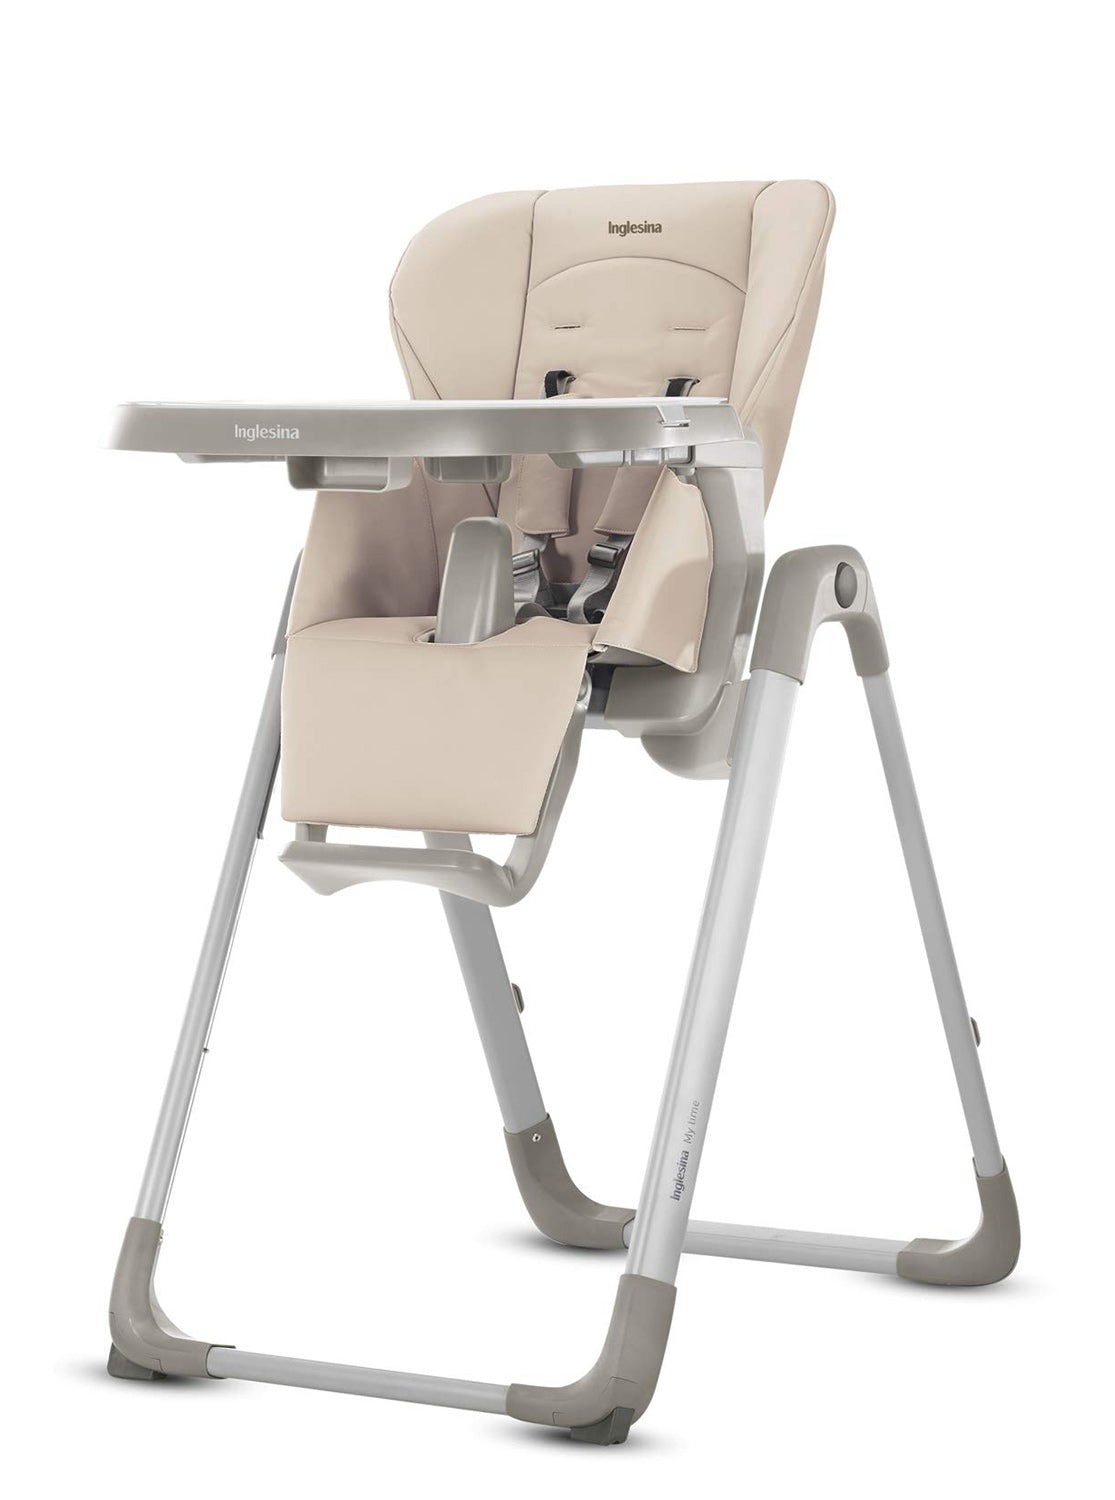 Inglesina My Time Highchair Features